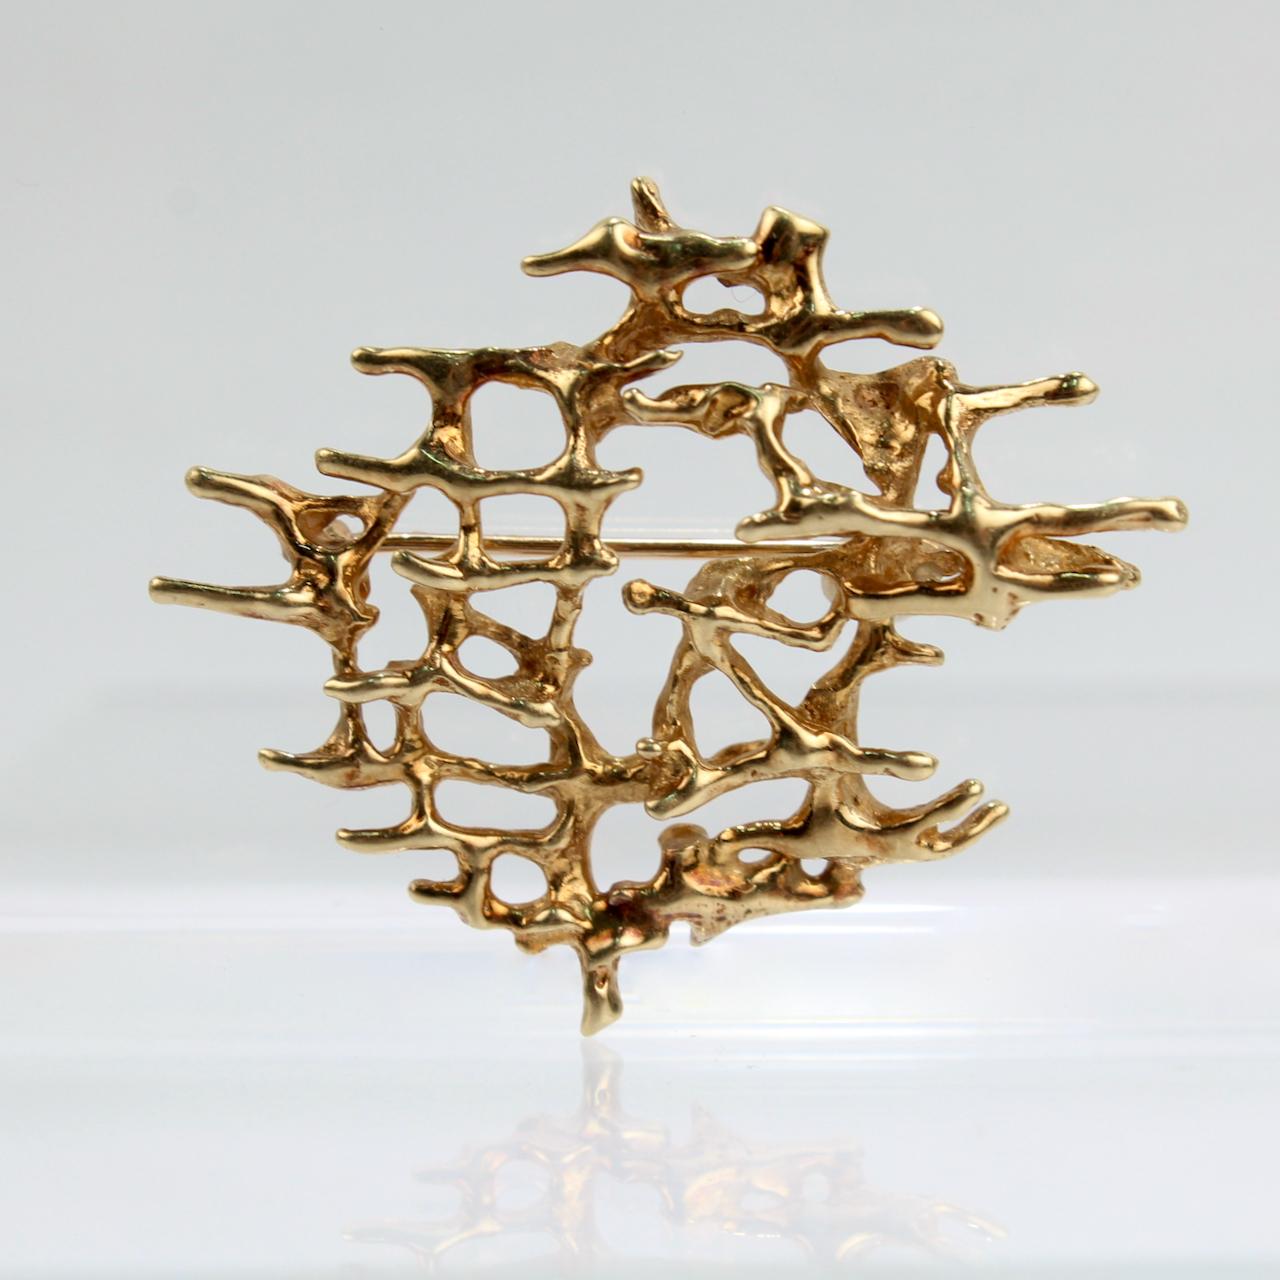 A fine brutalist brooch.

In 14k yellow gold.

With an organic, cast, root-like matrix pattern.

Great Brutalist design!

Date:
Mid-20th Century

Overall Condition:
It is in overall good, as-pictured, used estate condition with some very fine &